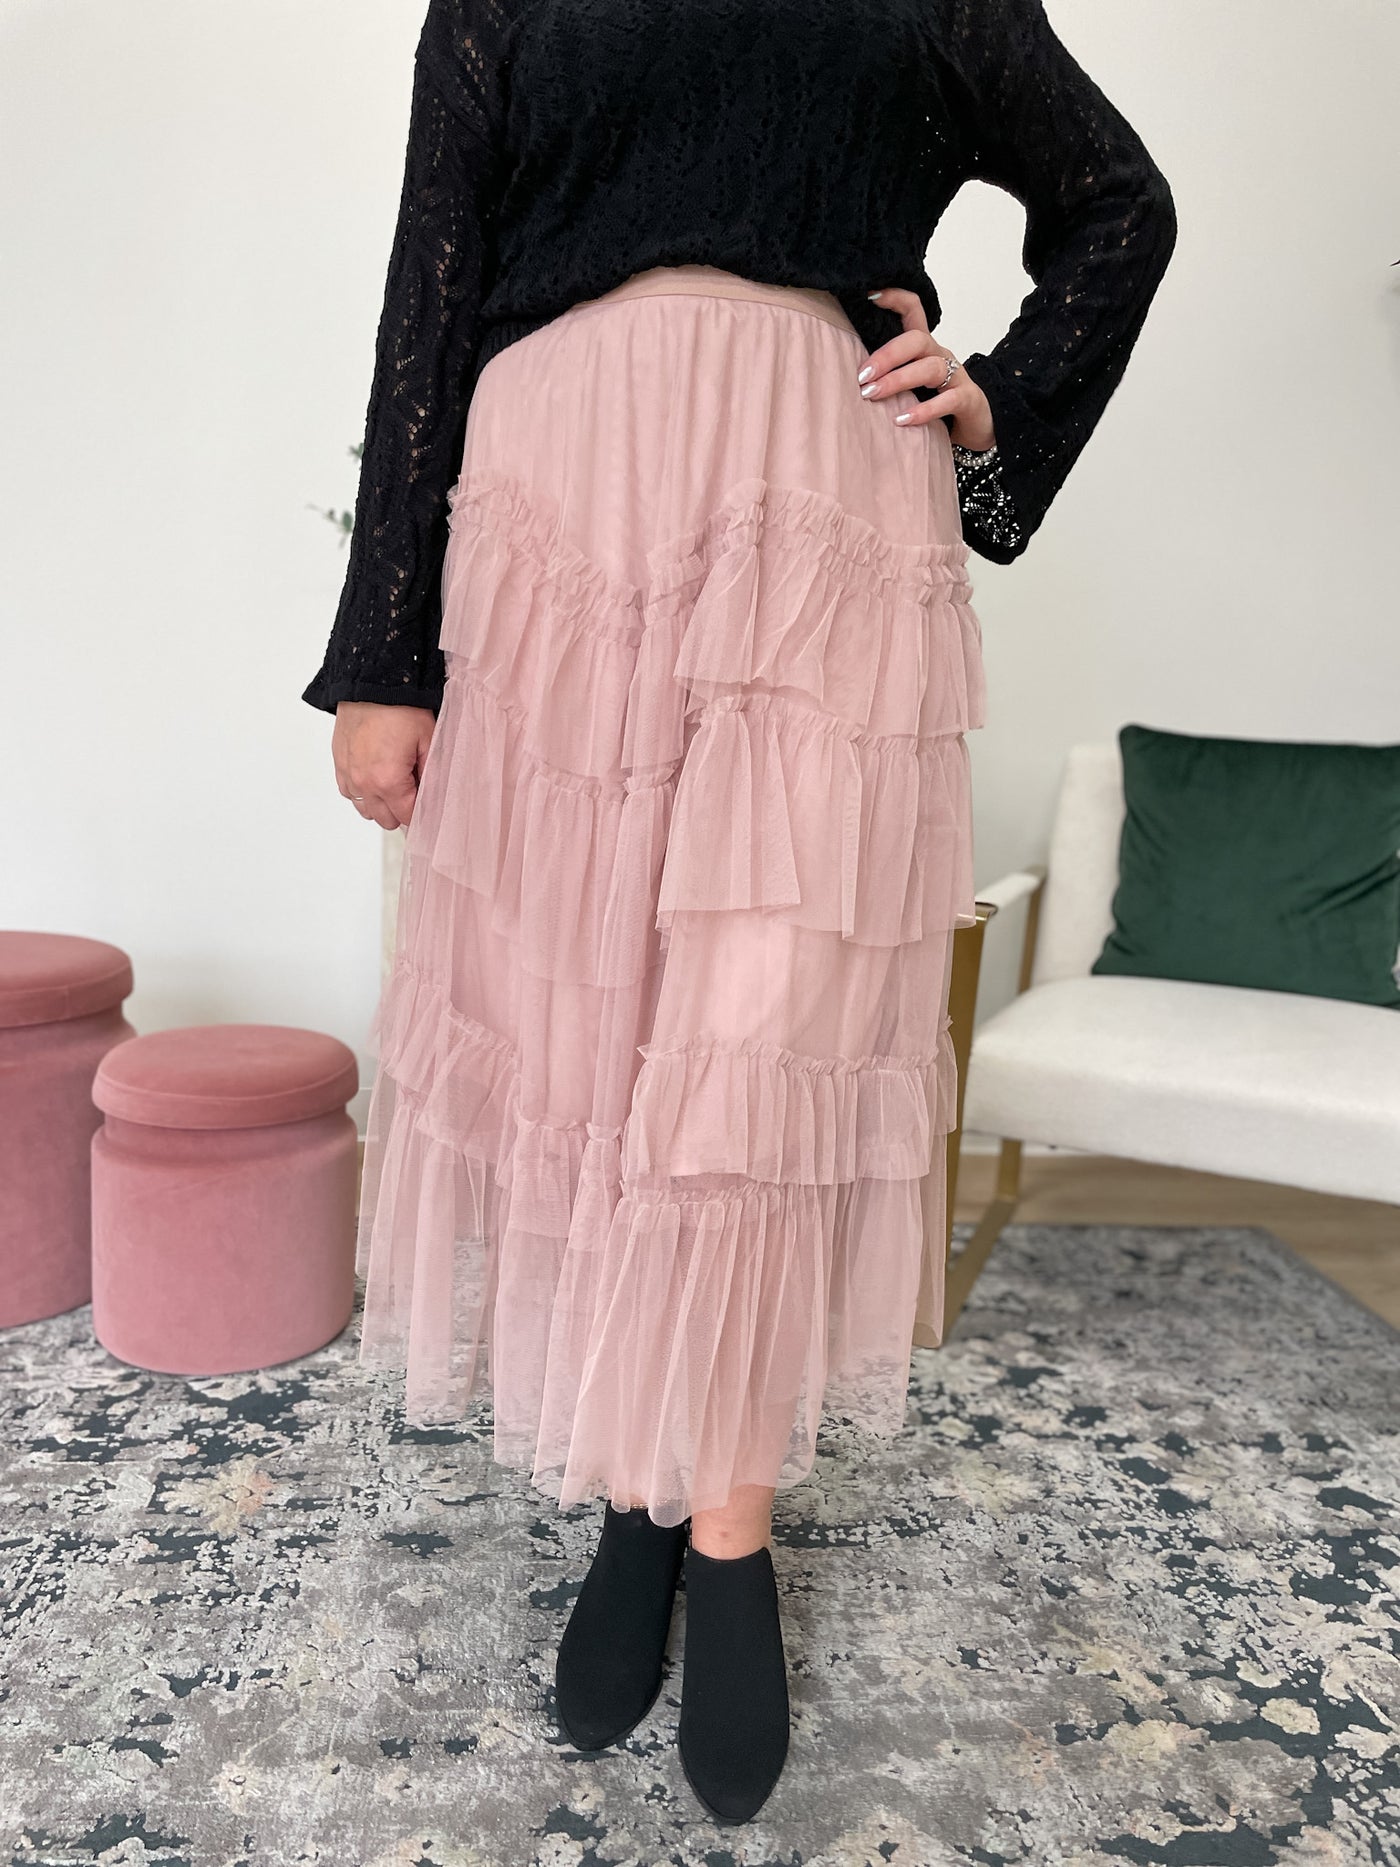 The Tiered Ruffled Tulle Midi Skirt in Nude Pink